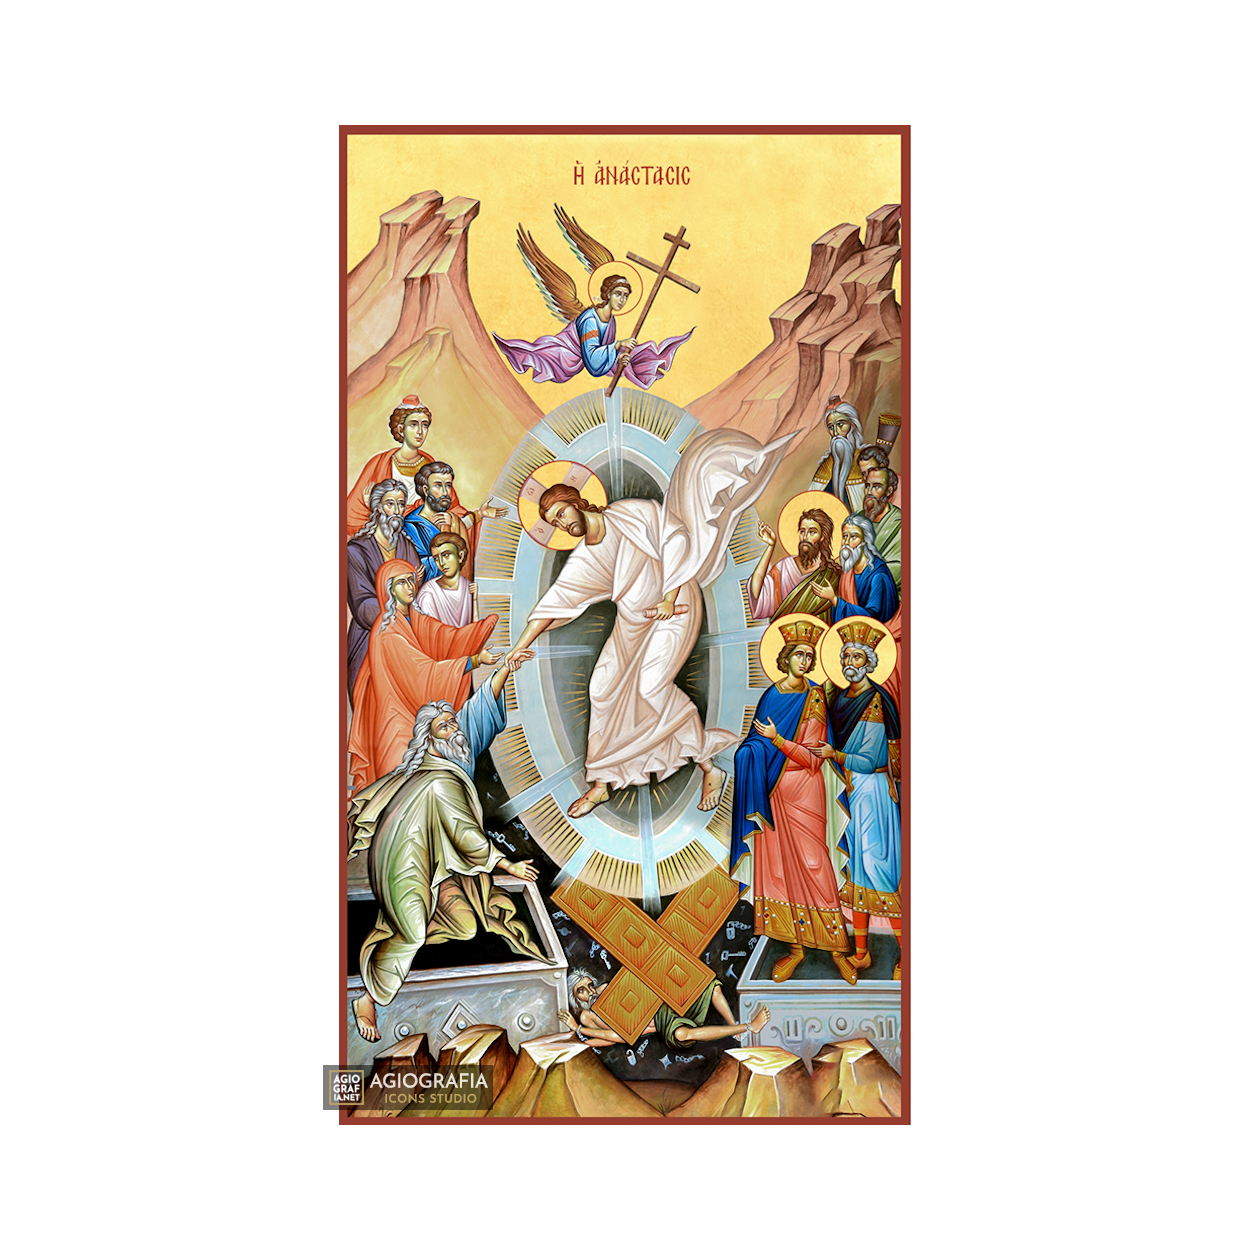 22k Resurrection of the Lord - Gold Leaf Background Orthodox Icon